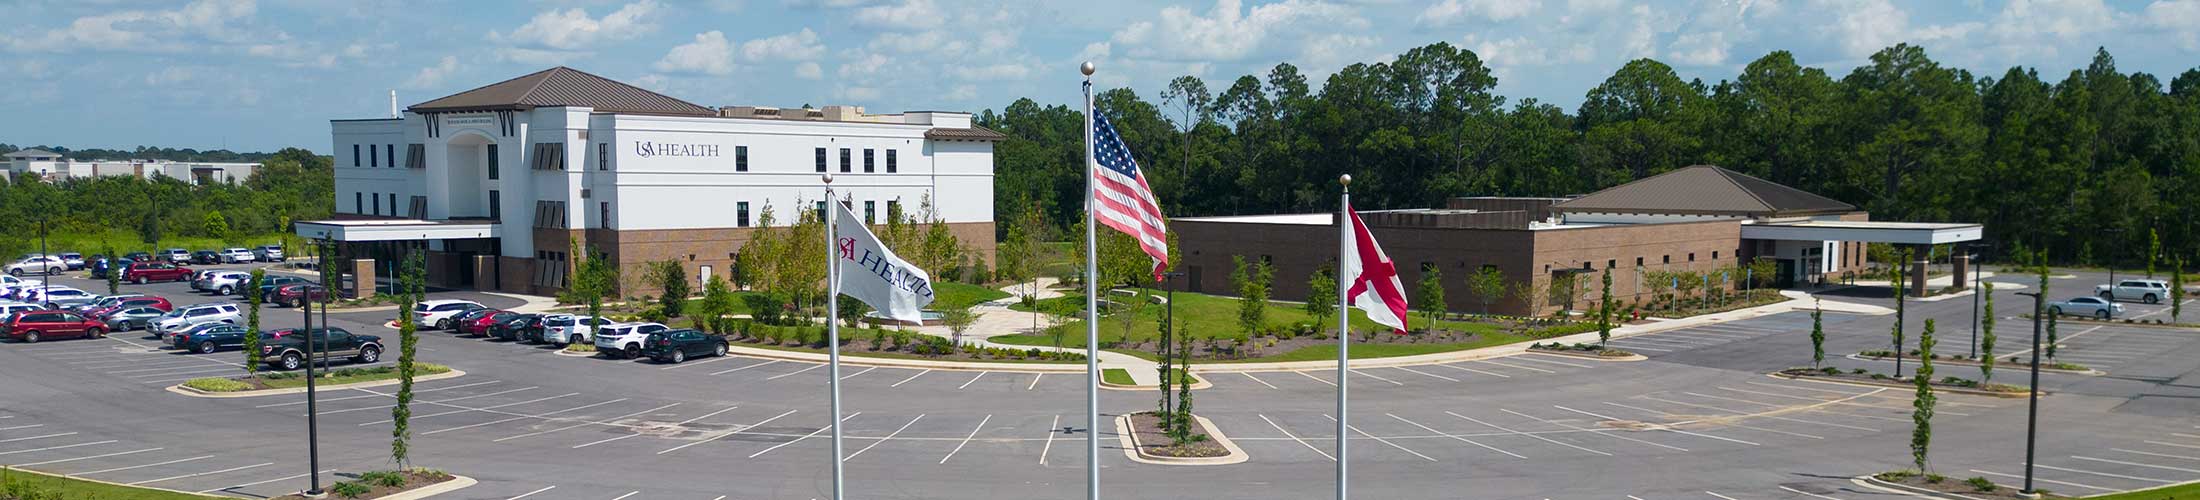 USA Health facility with flags in front.